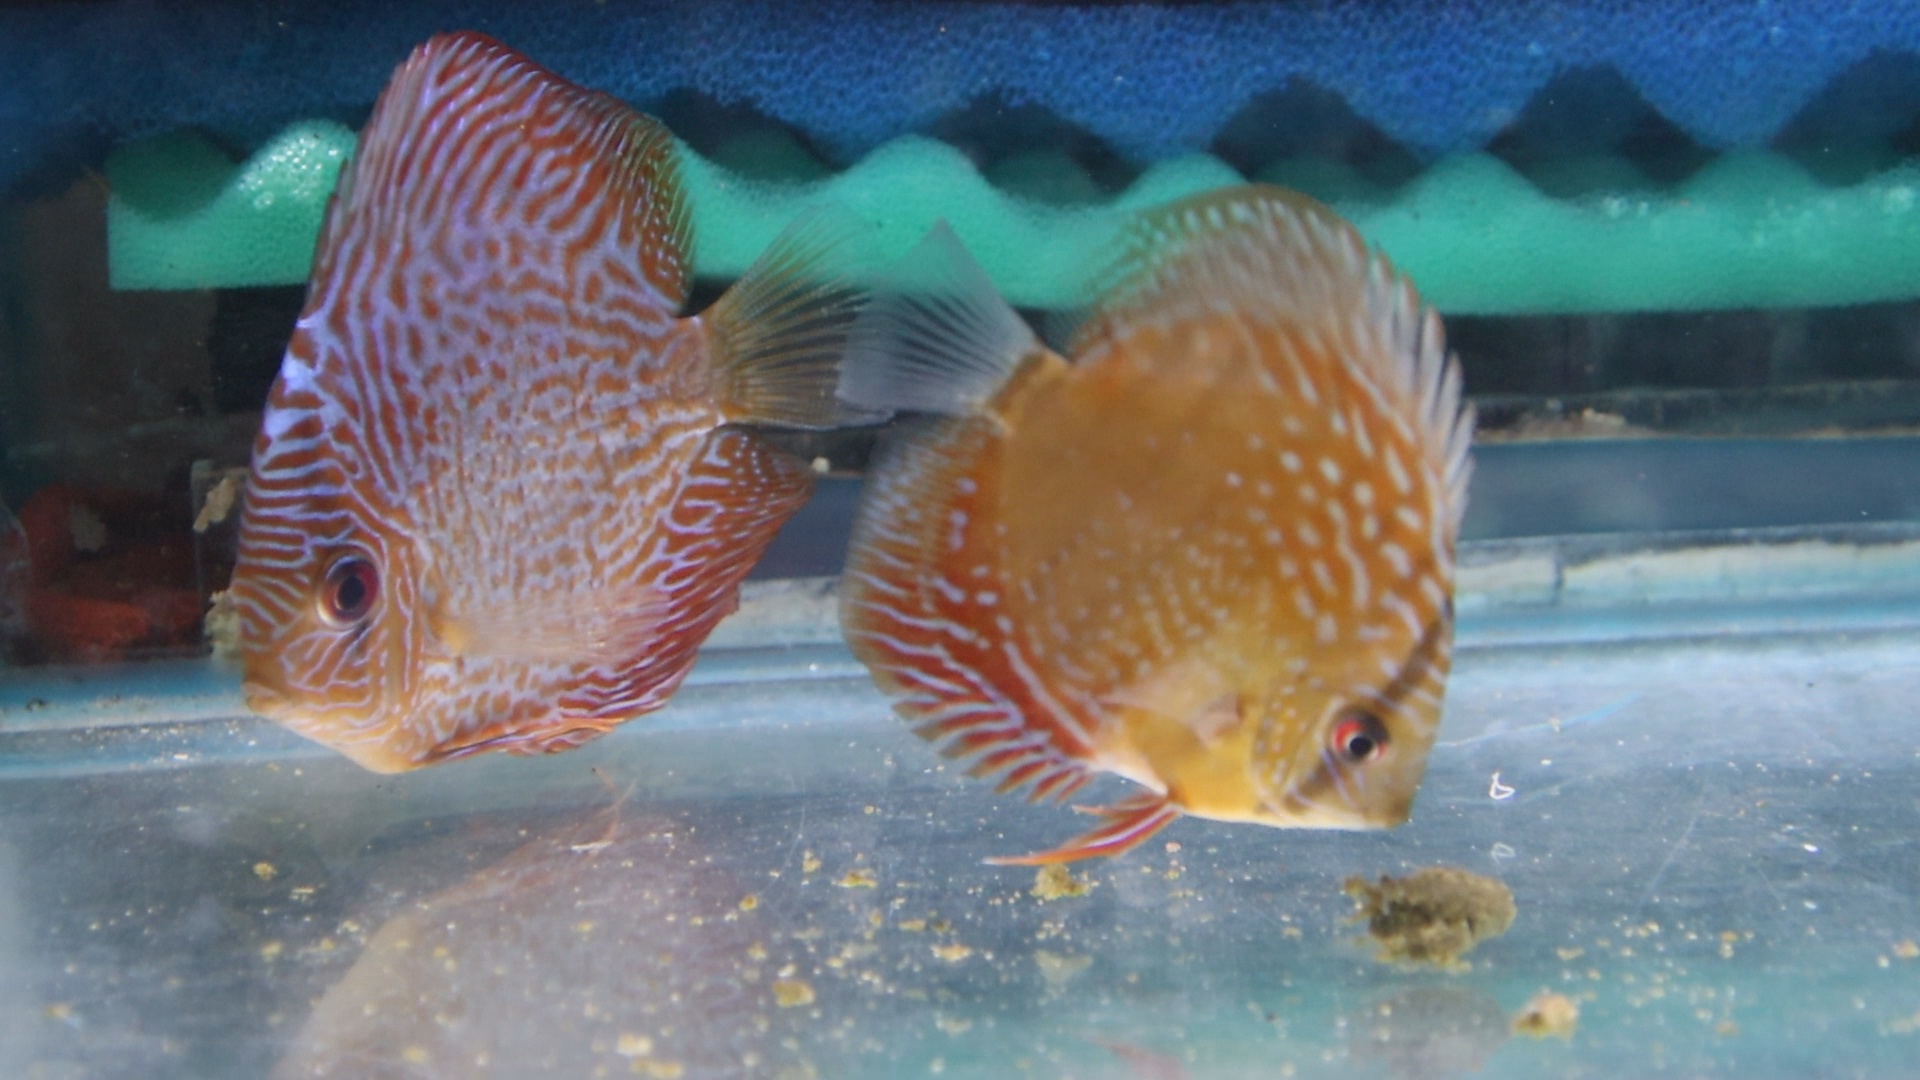 What is the average lifespan of the Discus fish?